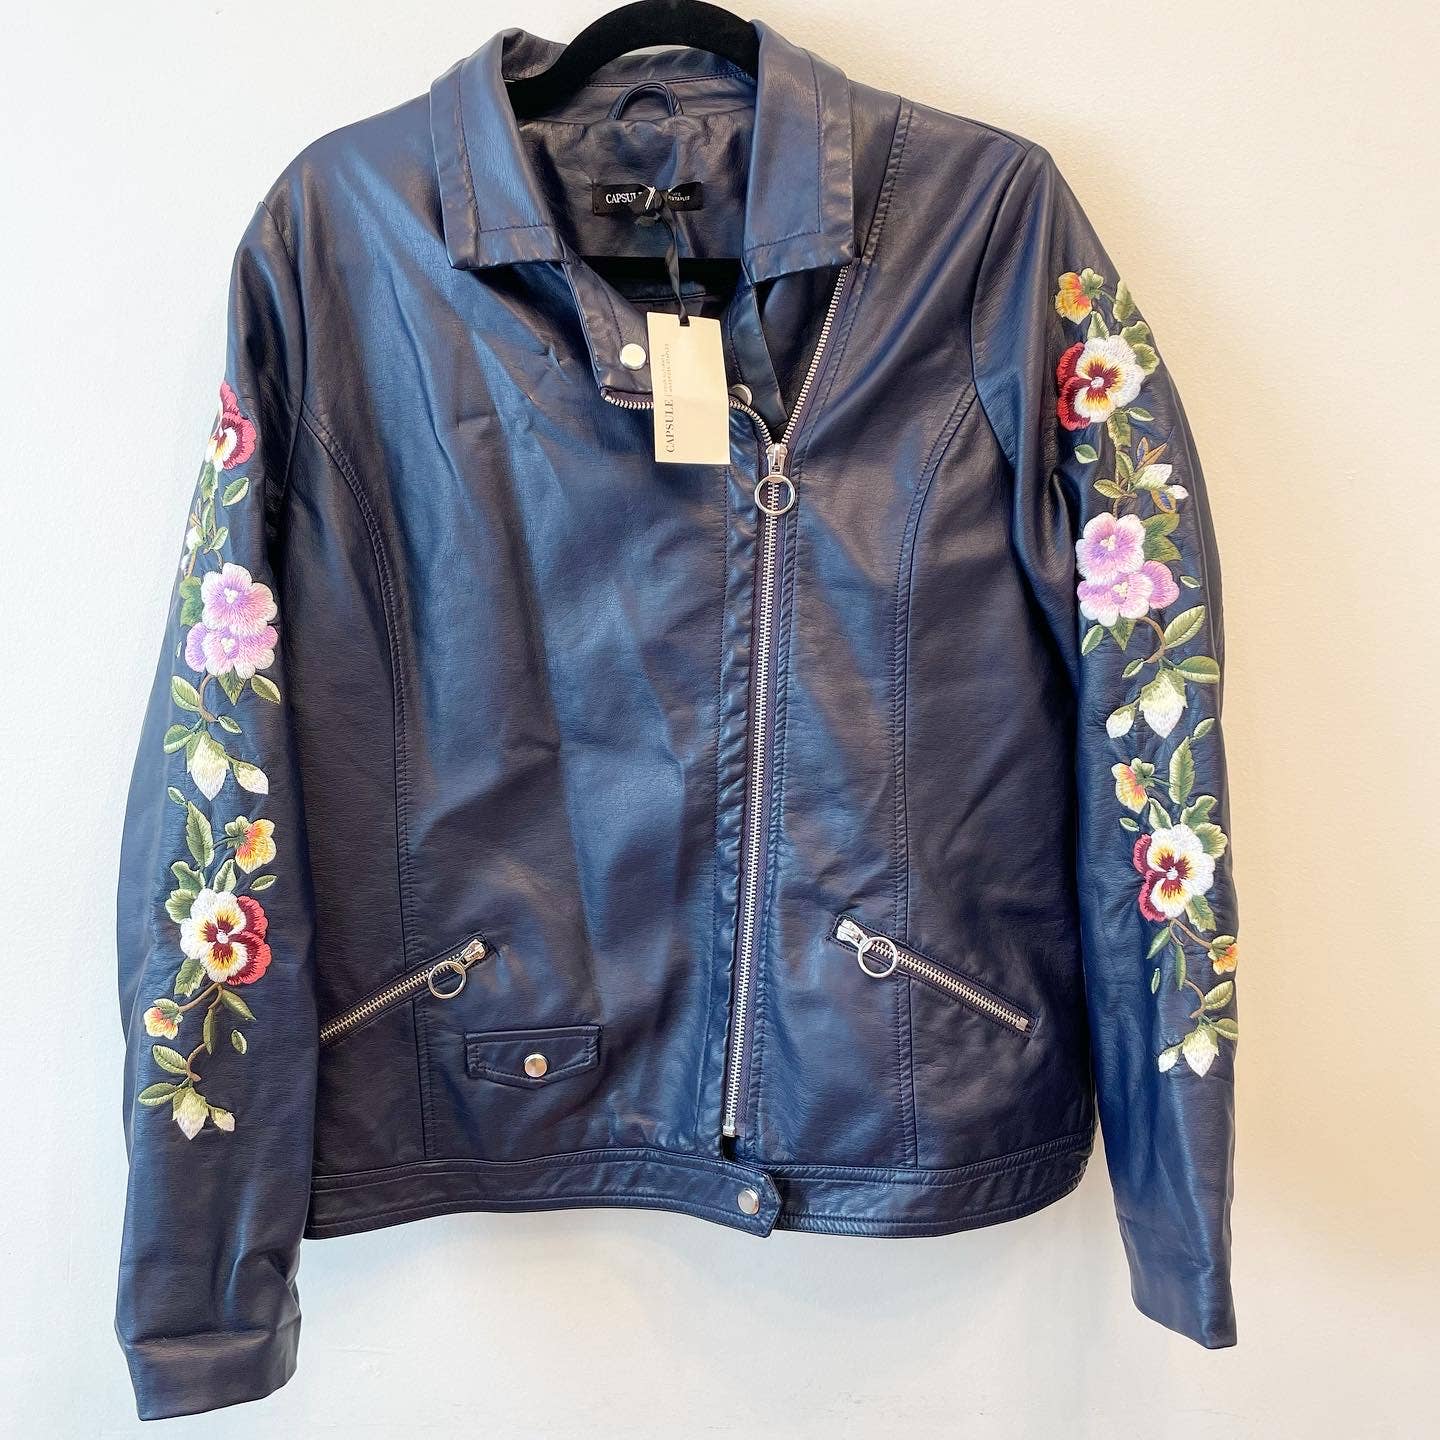 Capusle Navy Blue Floral Embroidered Faux Leather Moto Jacket